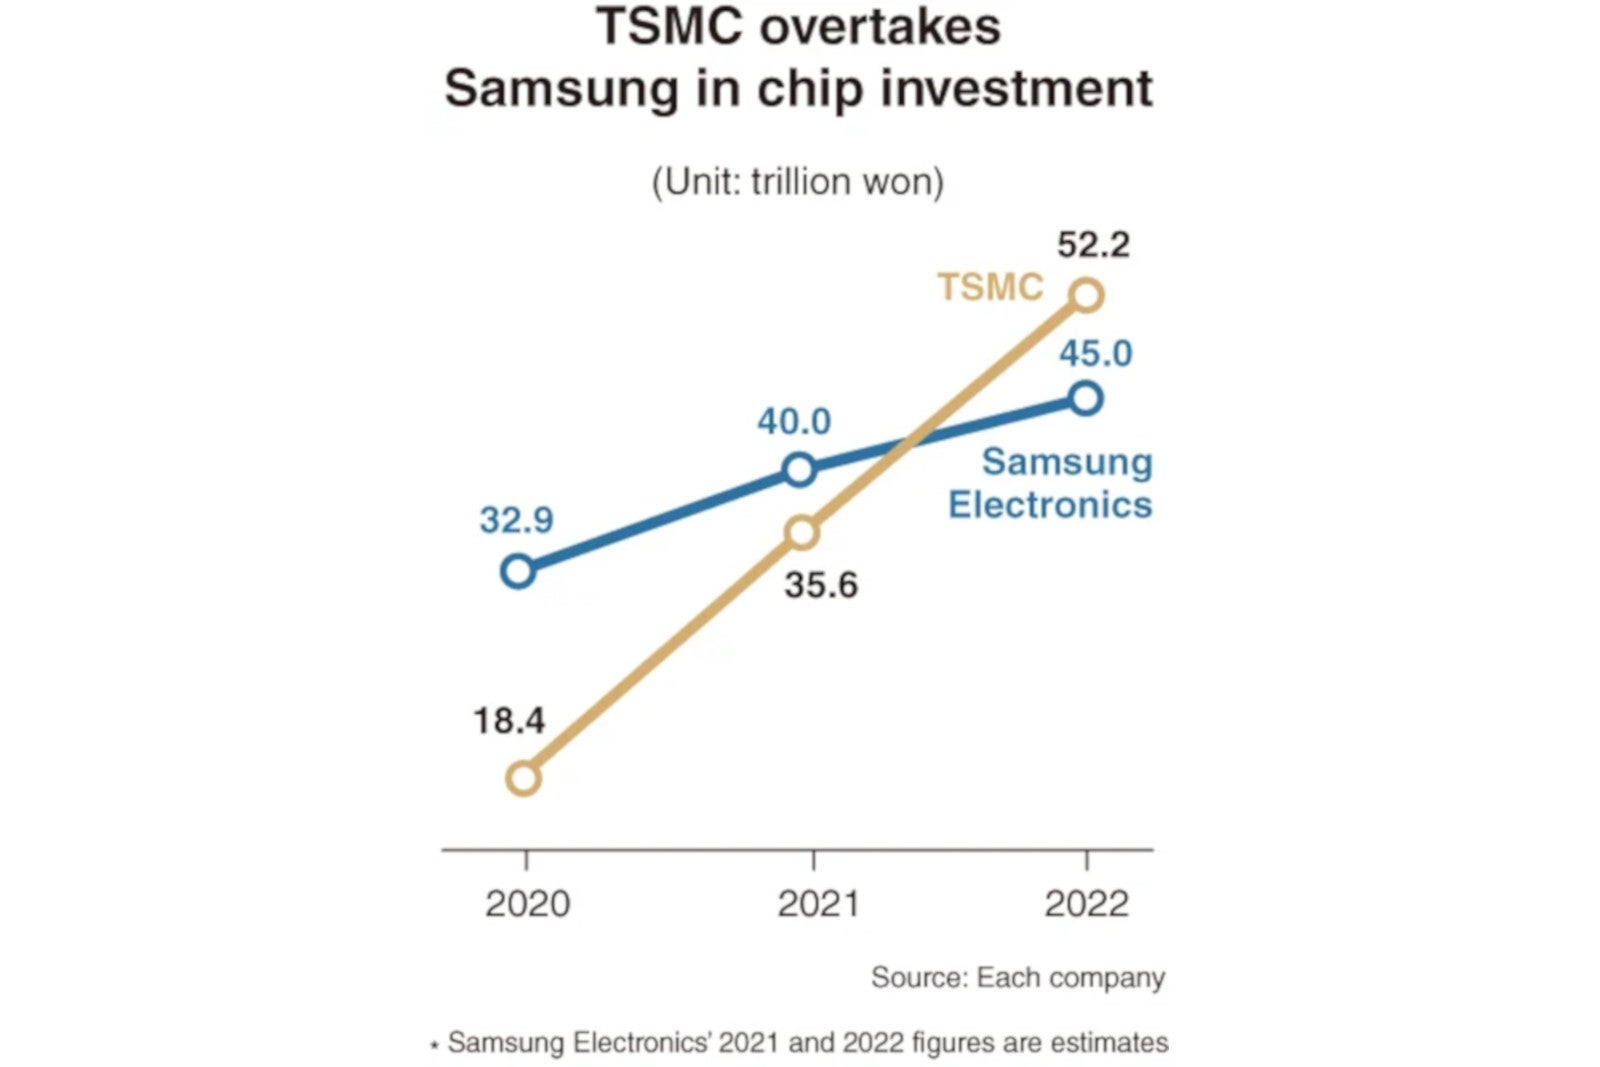 Samsung vs TSMC chip foundry investments for 2022 - TSMC is investing more than Samsung into chipmaking in 2022